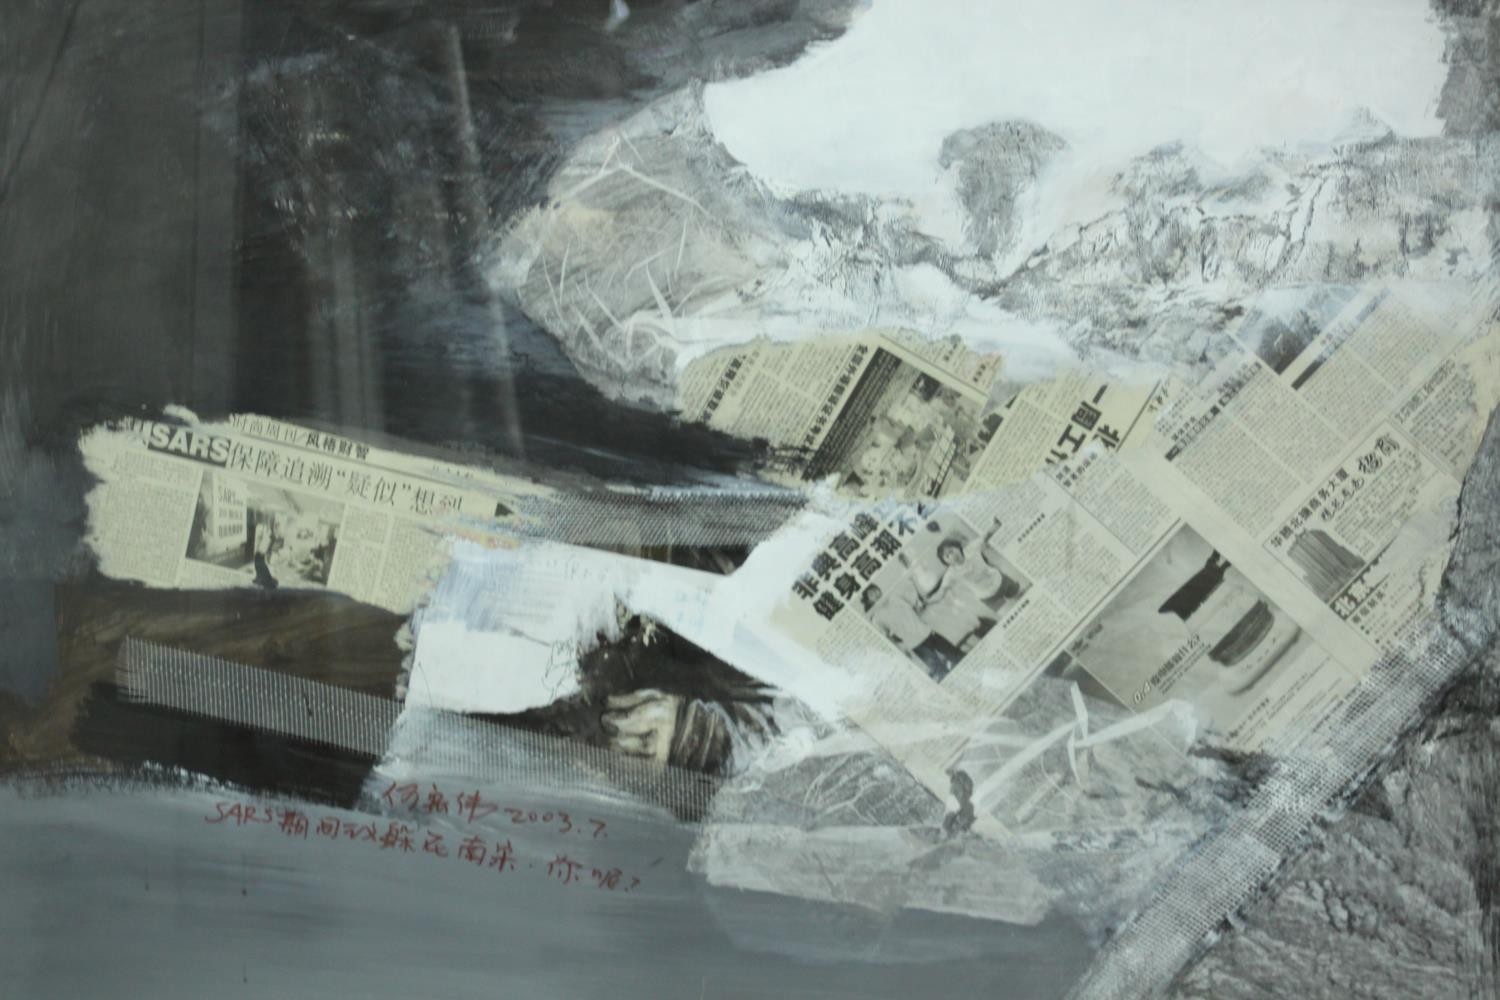 He Hong Wei, 1971, "Untitled" Mixed media on paper, label verso. H.92 W.120cm.